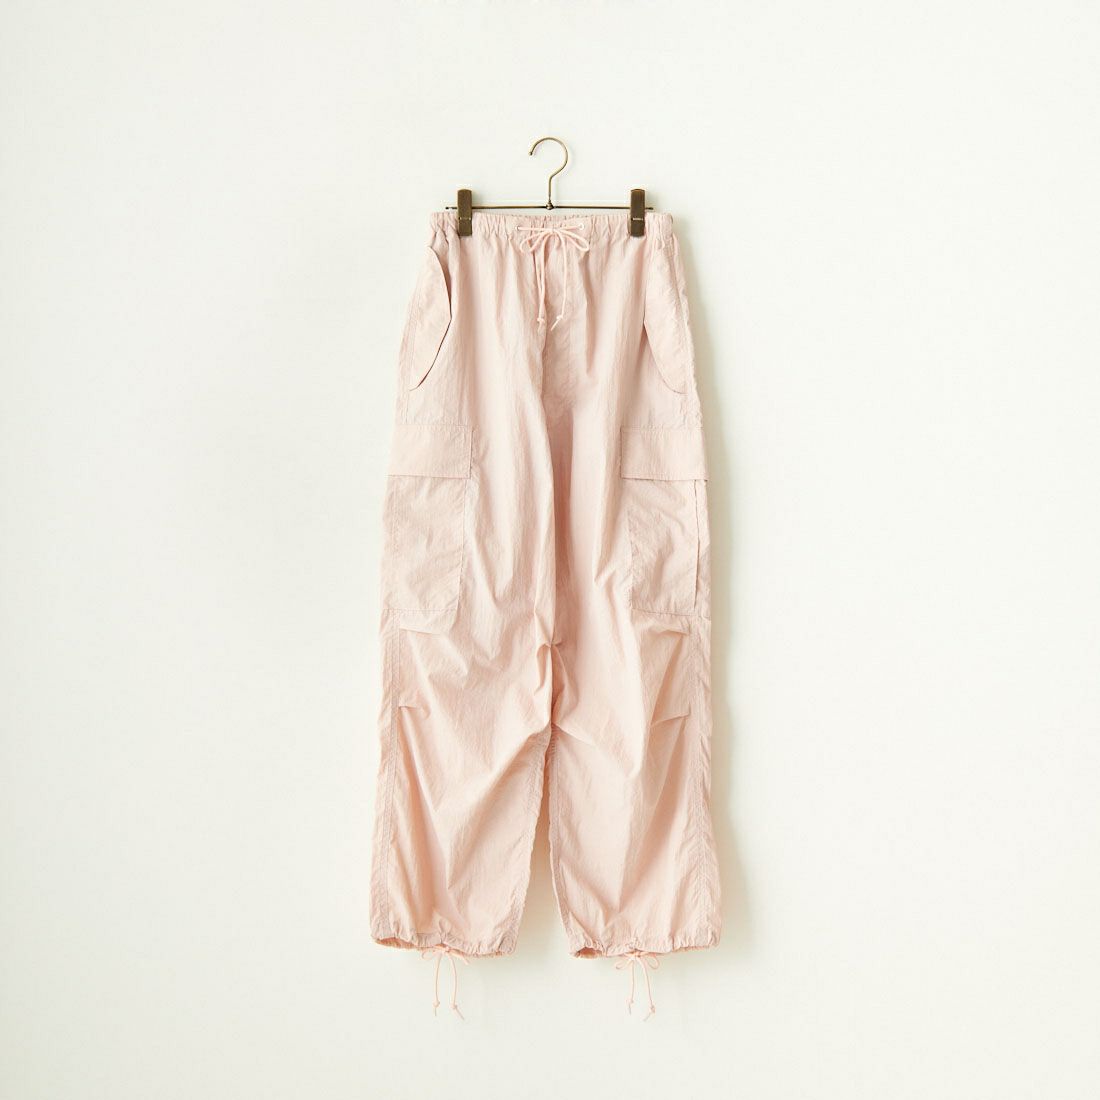 Jeans Factory Clothes [ジーンズファクトリークローズ] ナイロンバルーンカーゴパンツ [IN8-PT-4] PINK